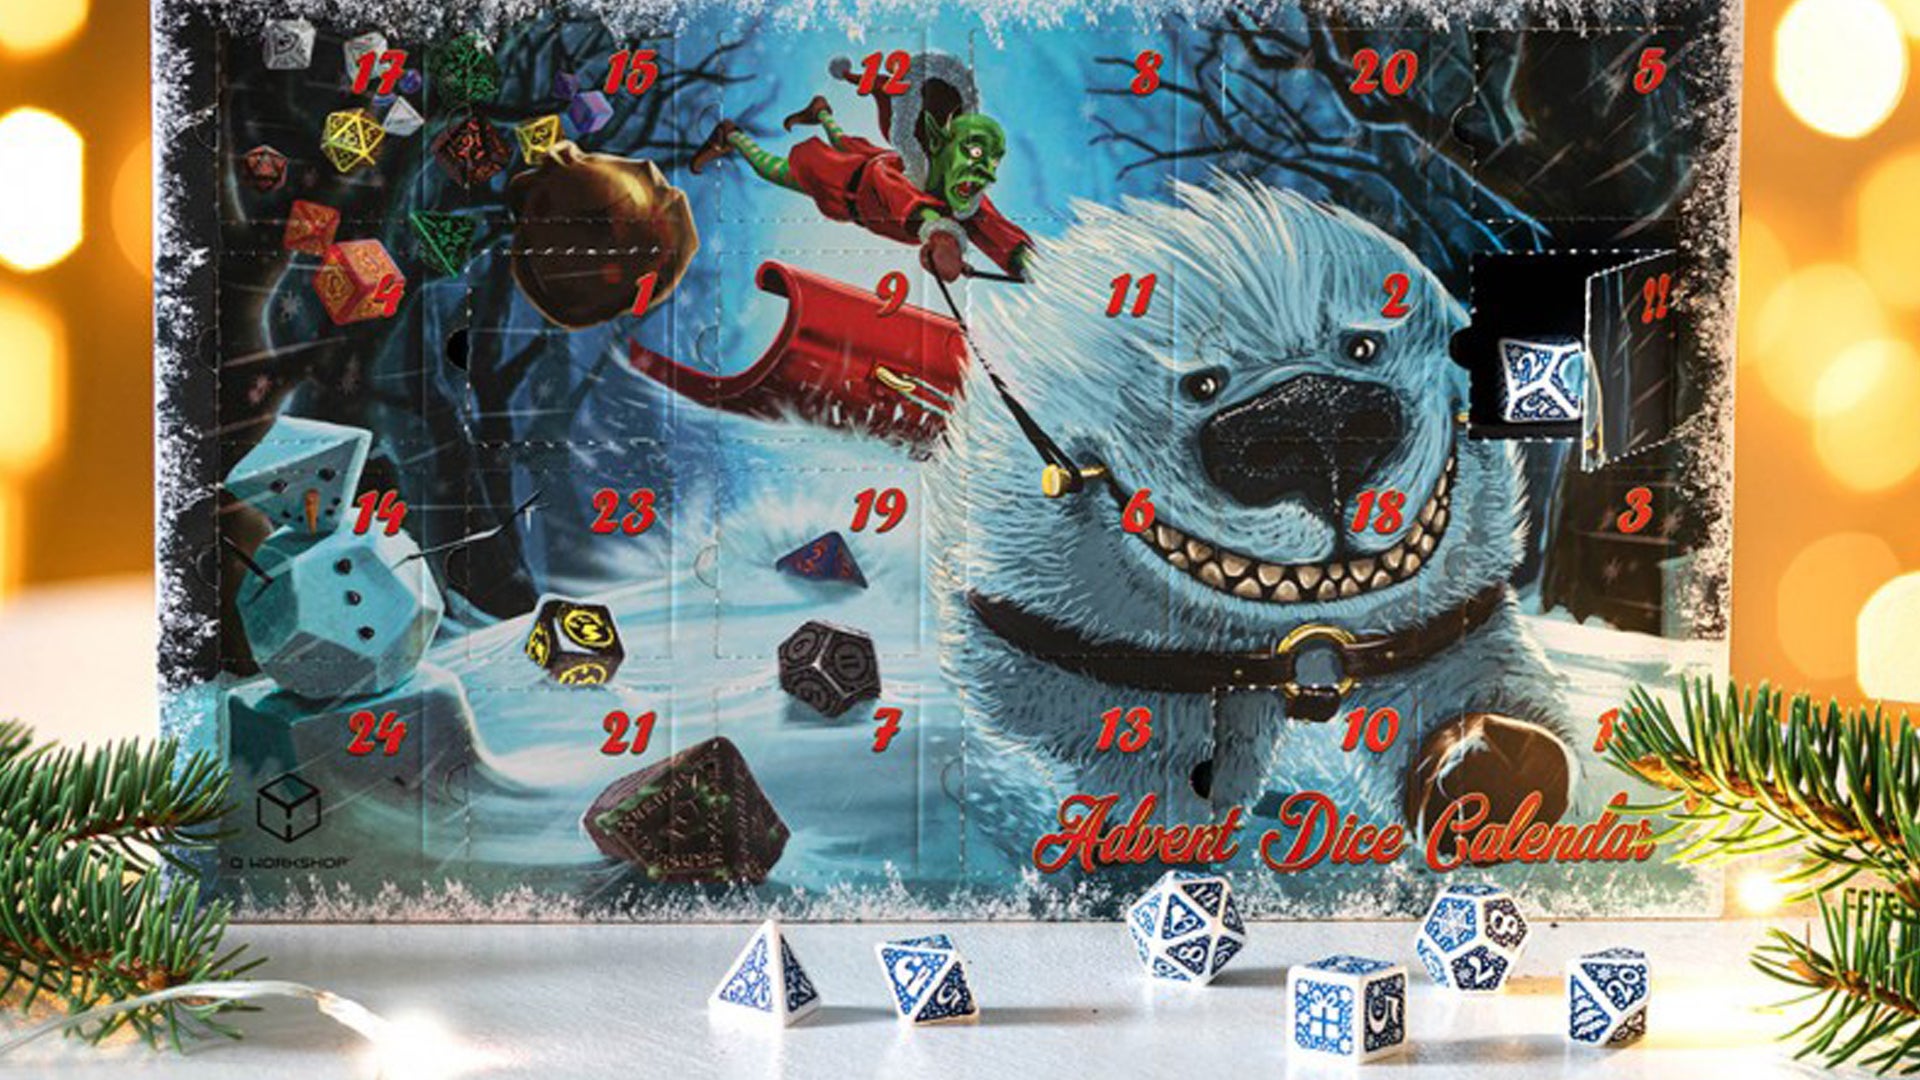 Image for £44 dice advent calendar lets you count down the d12 Days of Christmas